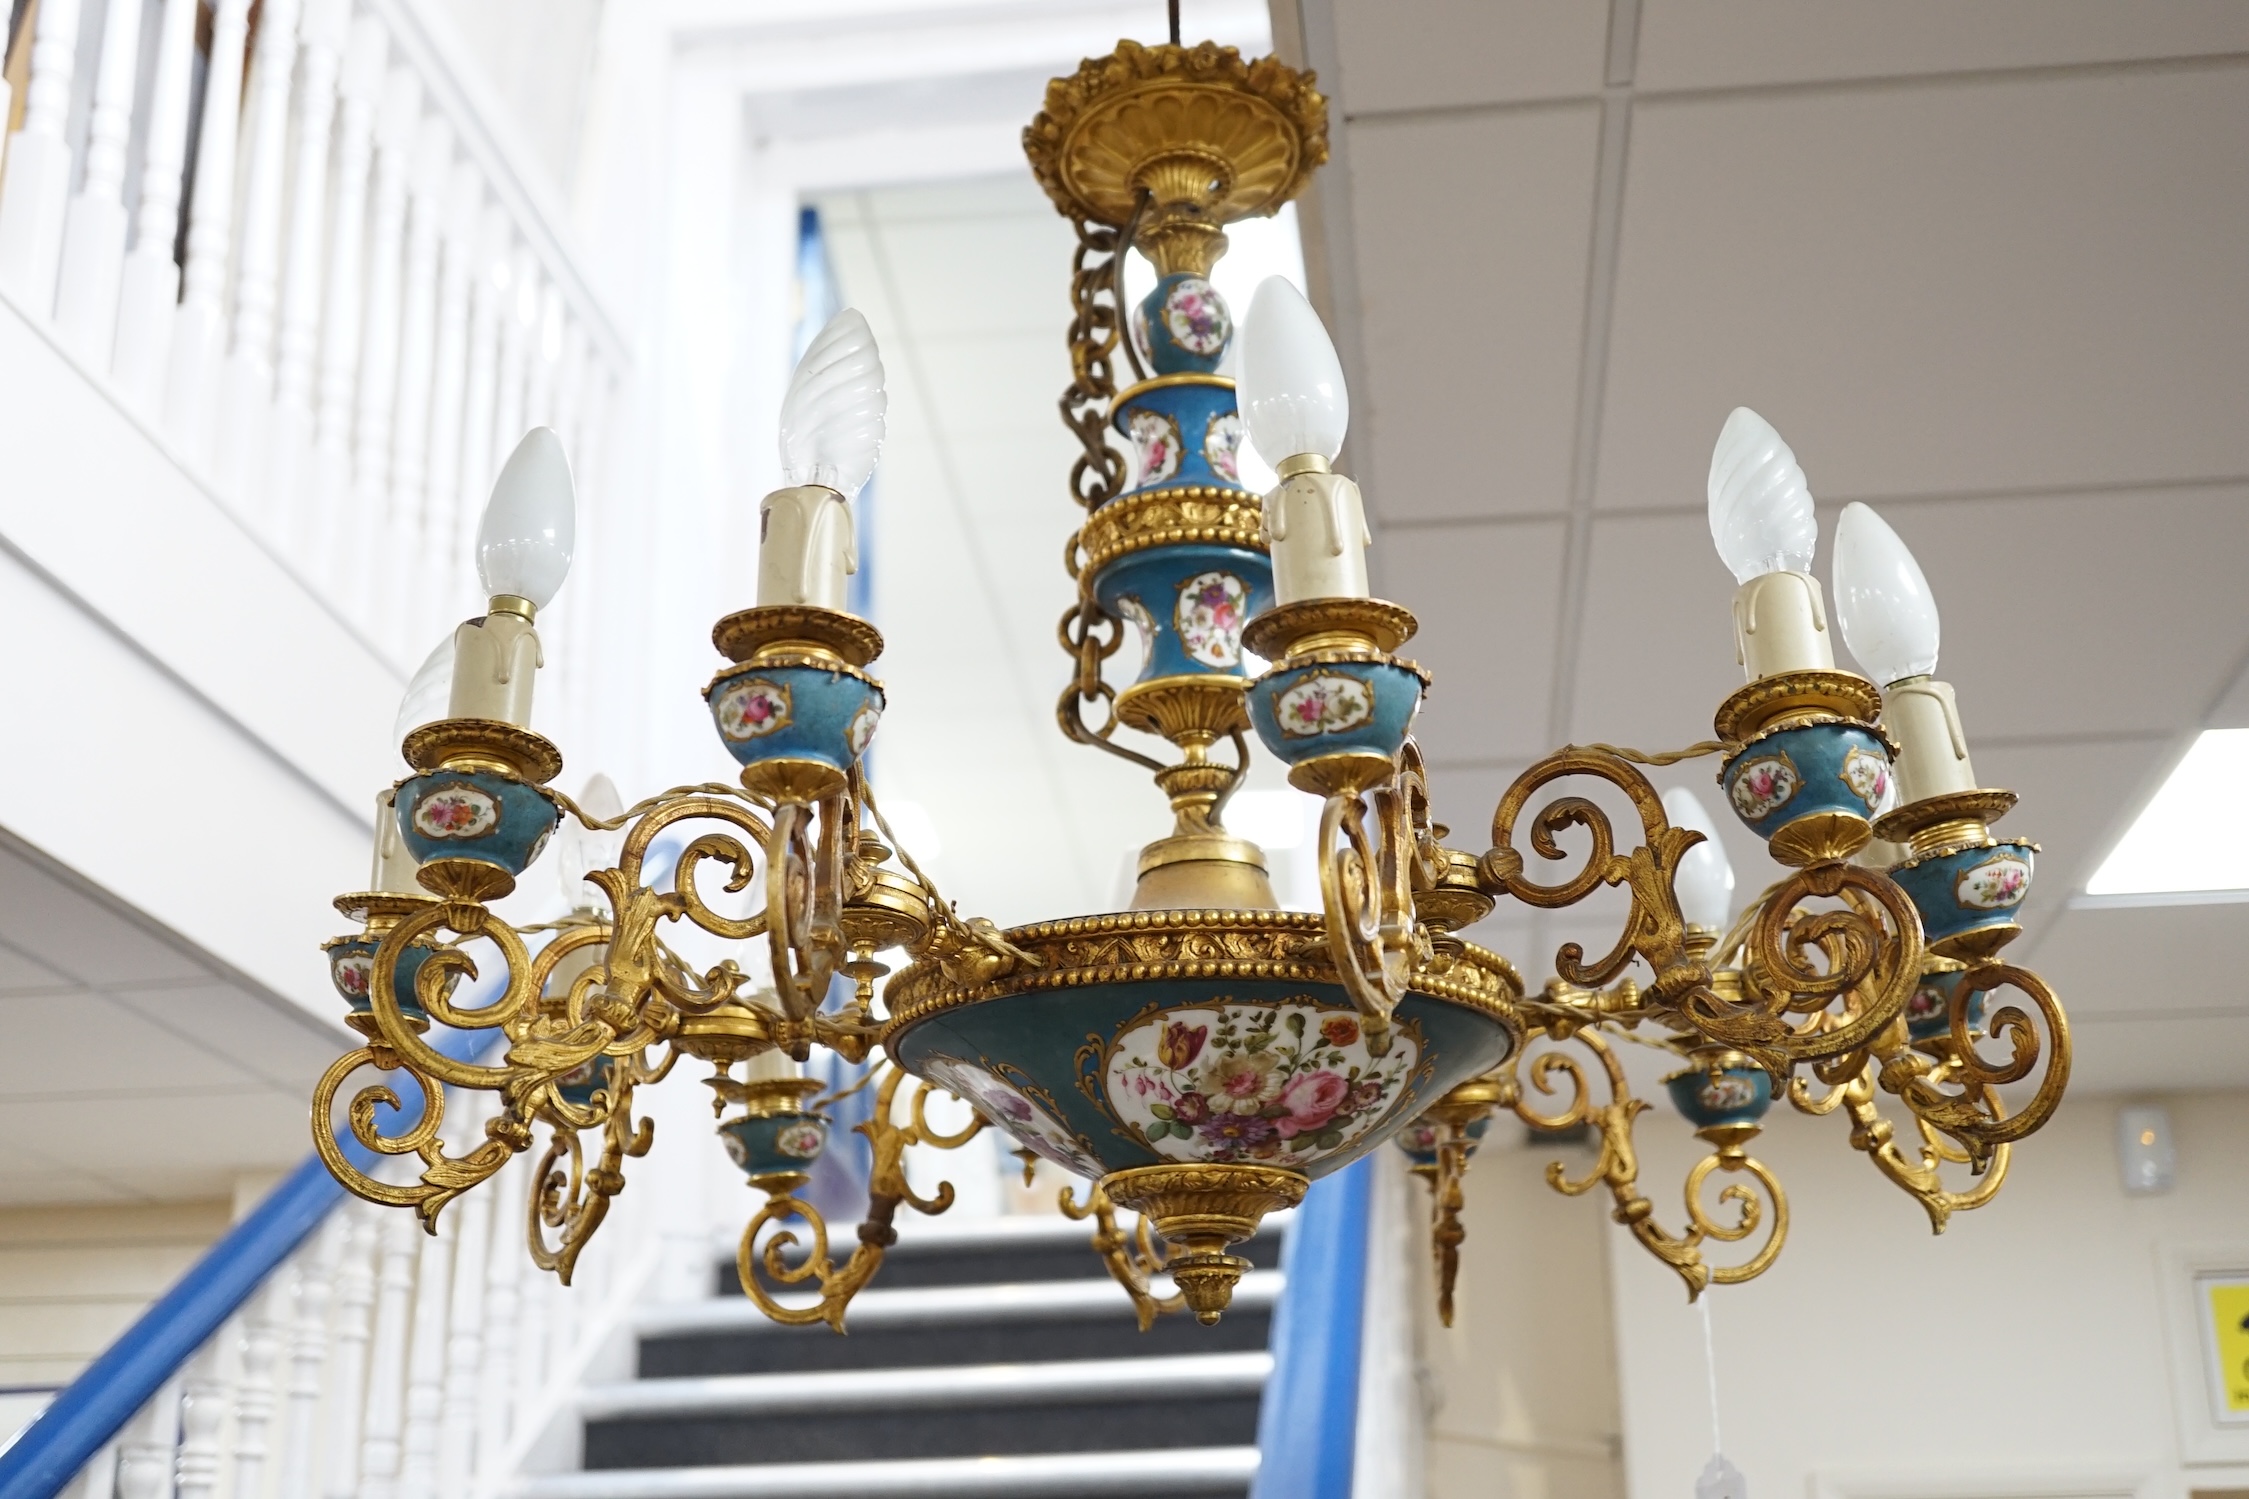 A Sevres style porcelain and gilt metal mounted twelve light chandelier, late 19th / 20th century, 60cm high excluding chain. Condition - fair